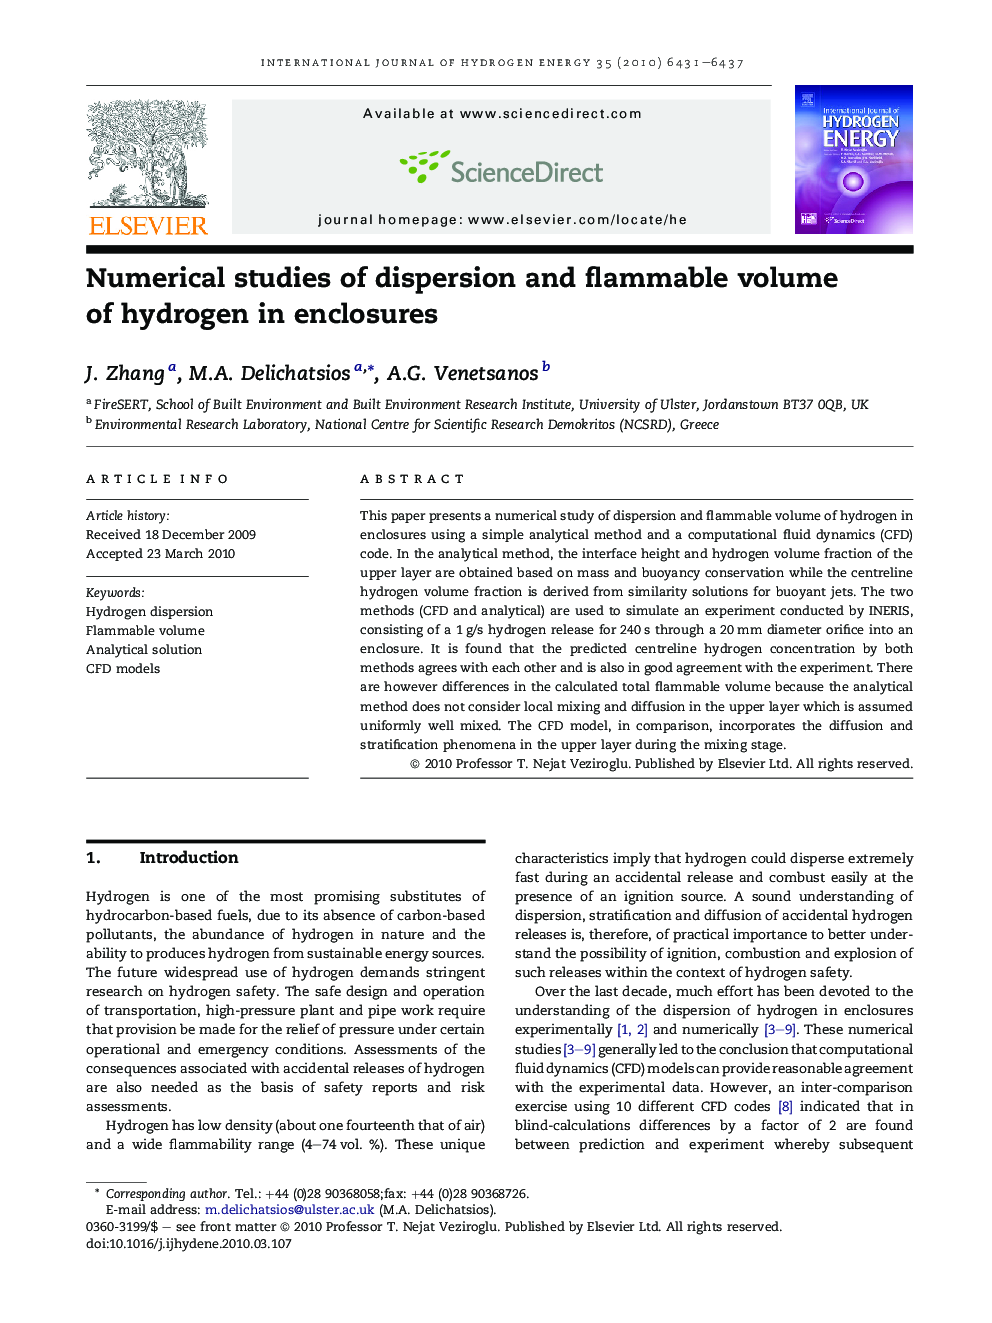 Numerical studies of dispersion and flammable volume of hydrogen in enclosures